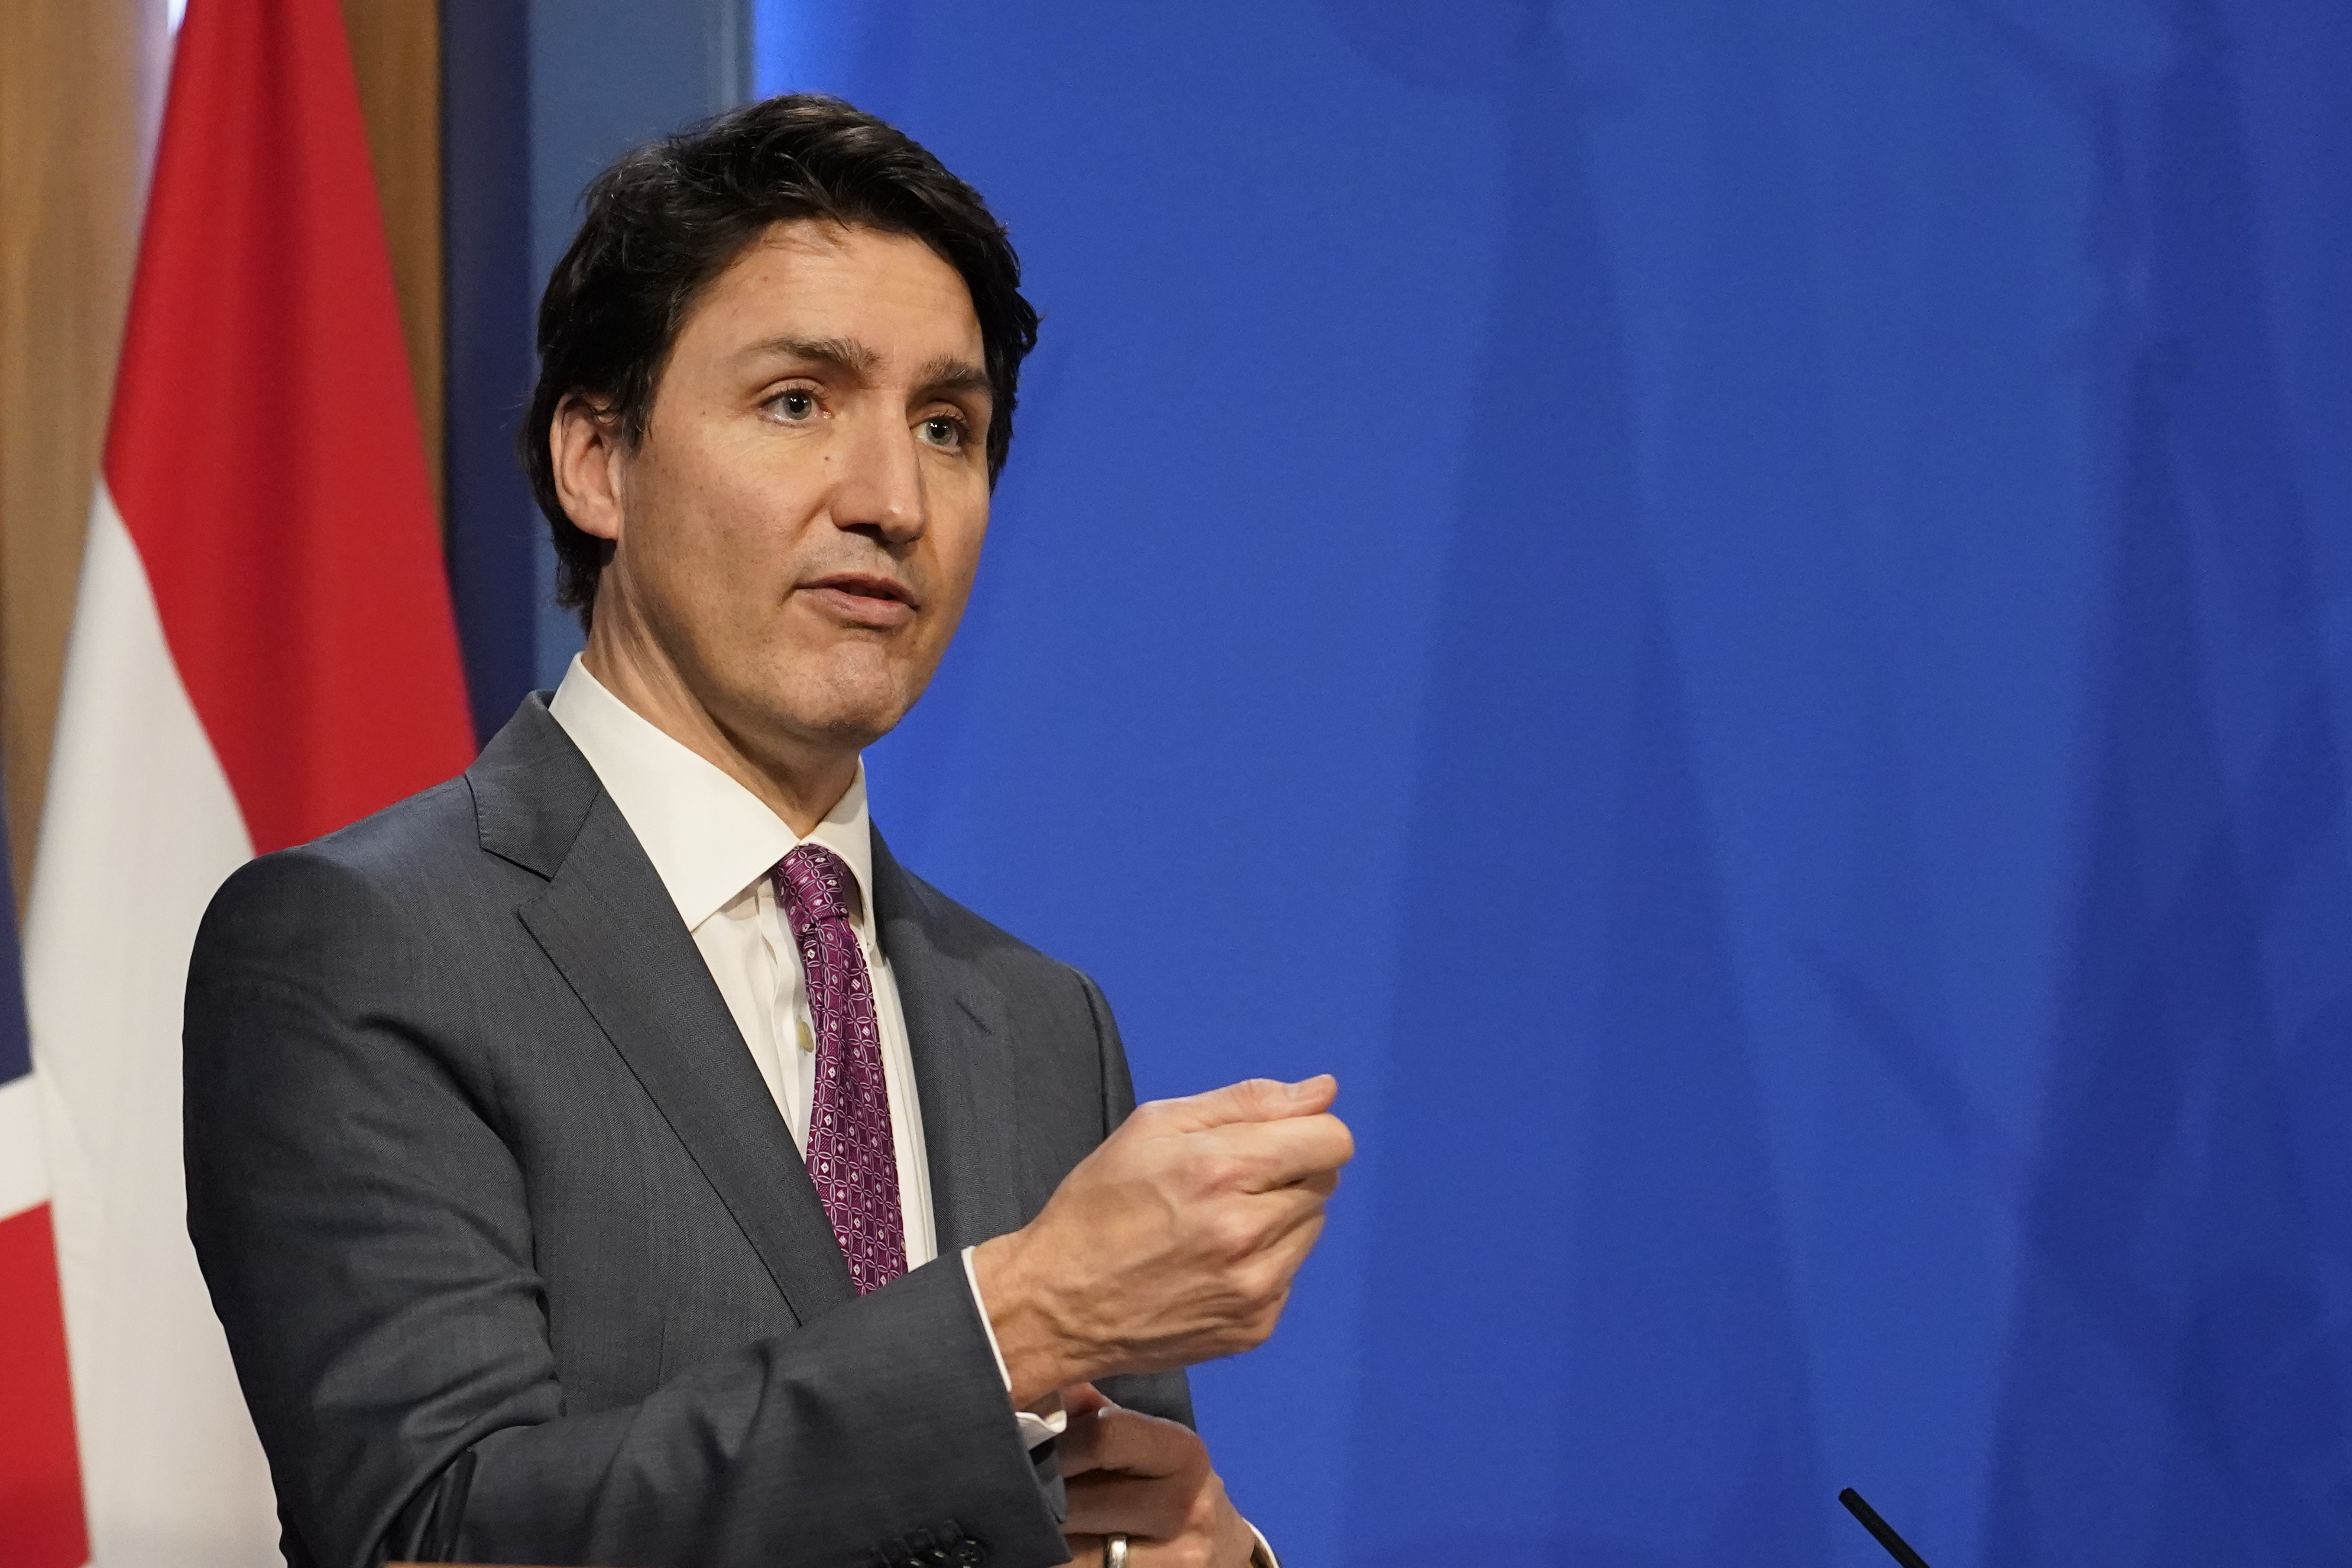 Trudeau Expected to Step Down As Prime Minister of Canada Come 2023 by Majority of Canadians